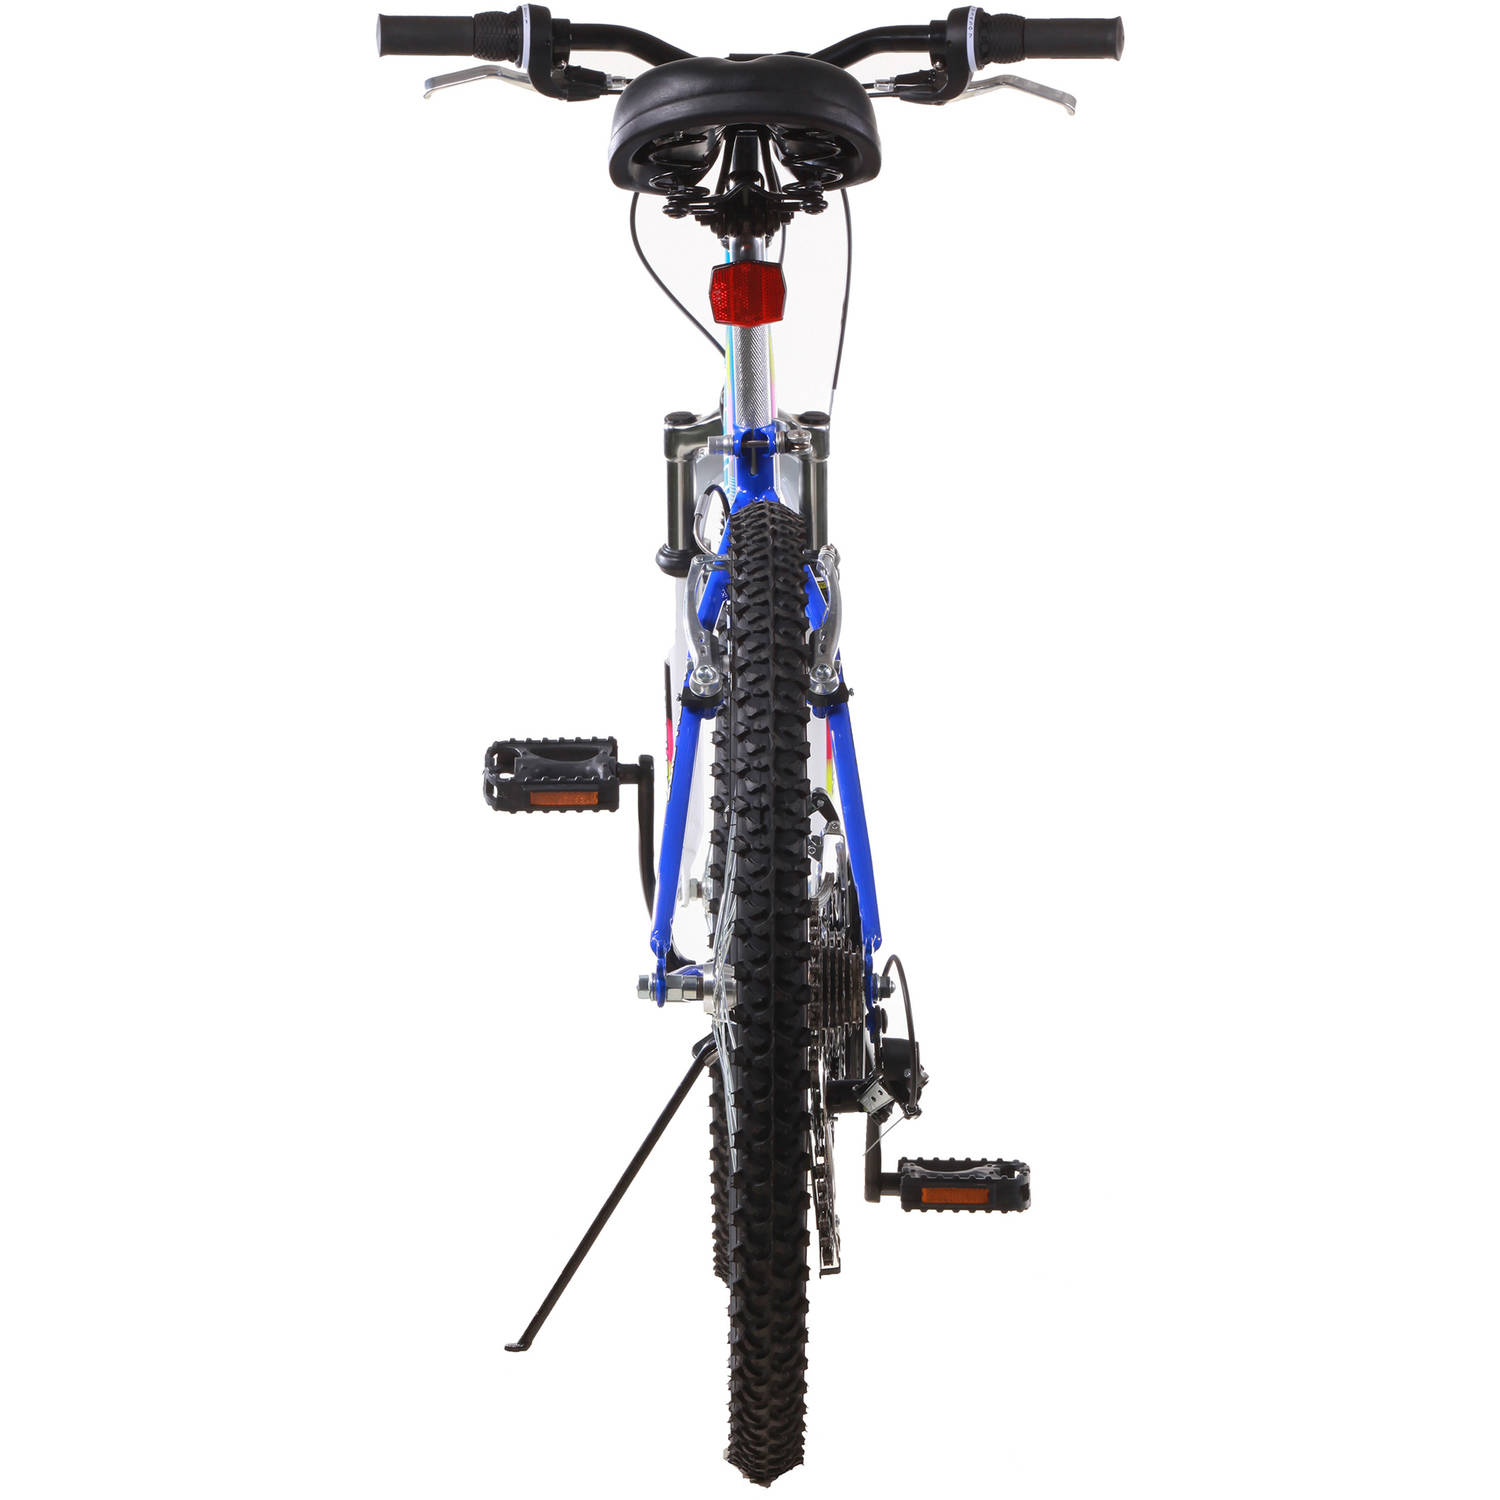 TITAN Trail 21-Speed Suspension Women's Mountain Bike with Front Shock, Blue - image 5 of 12